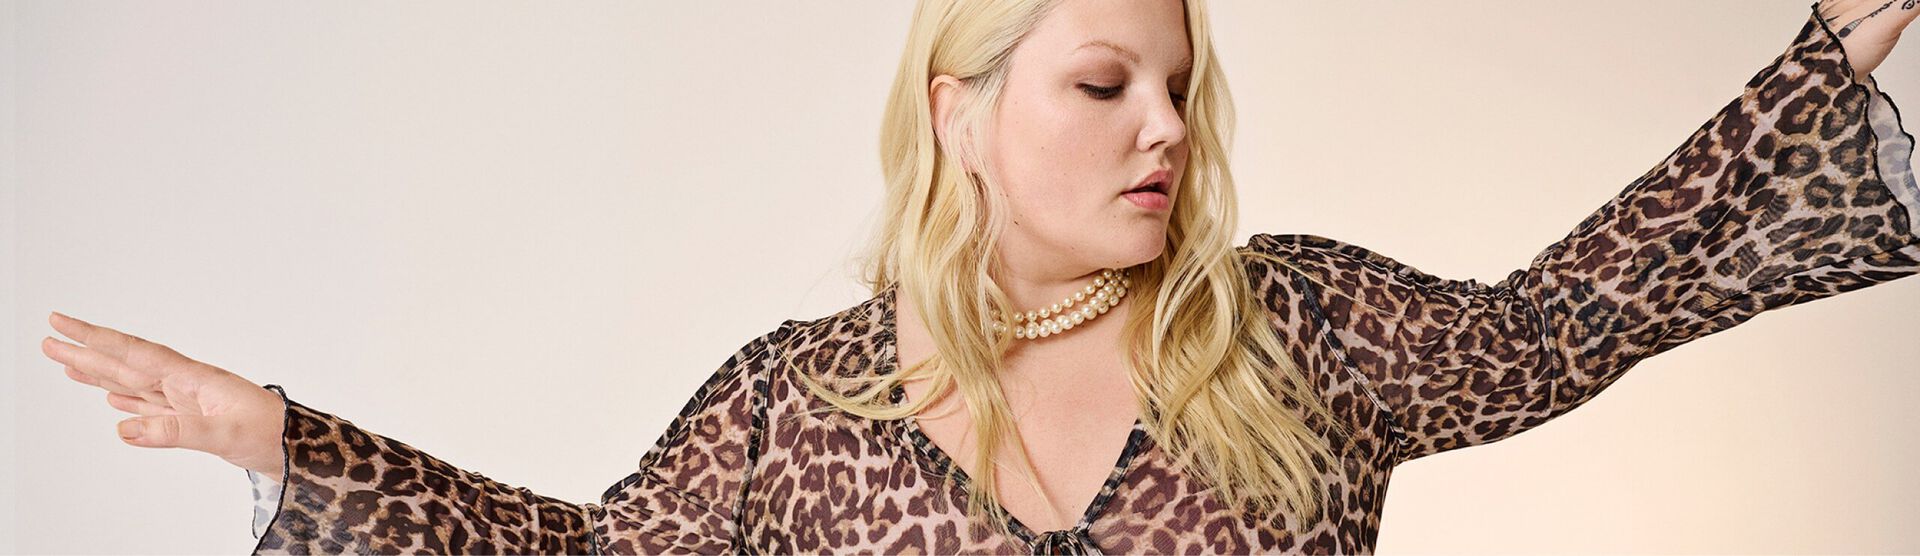 Classic, animistic and trendy: the leopard print is back 